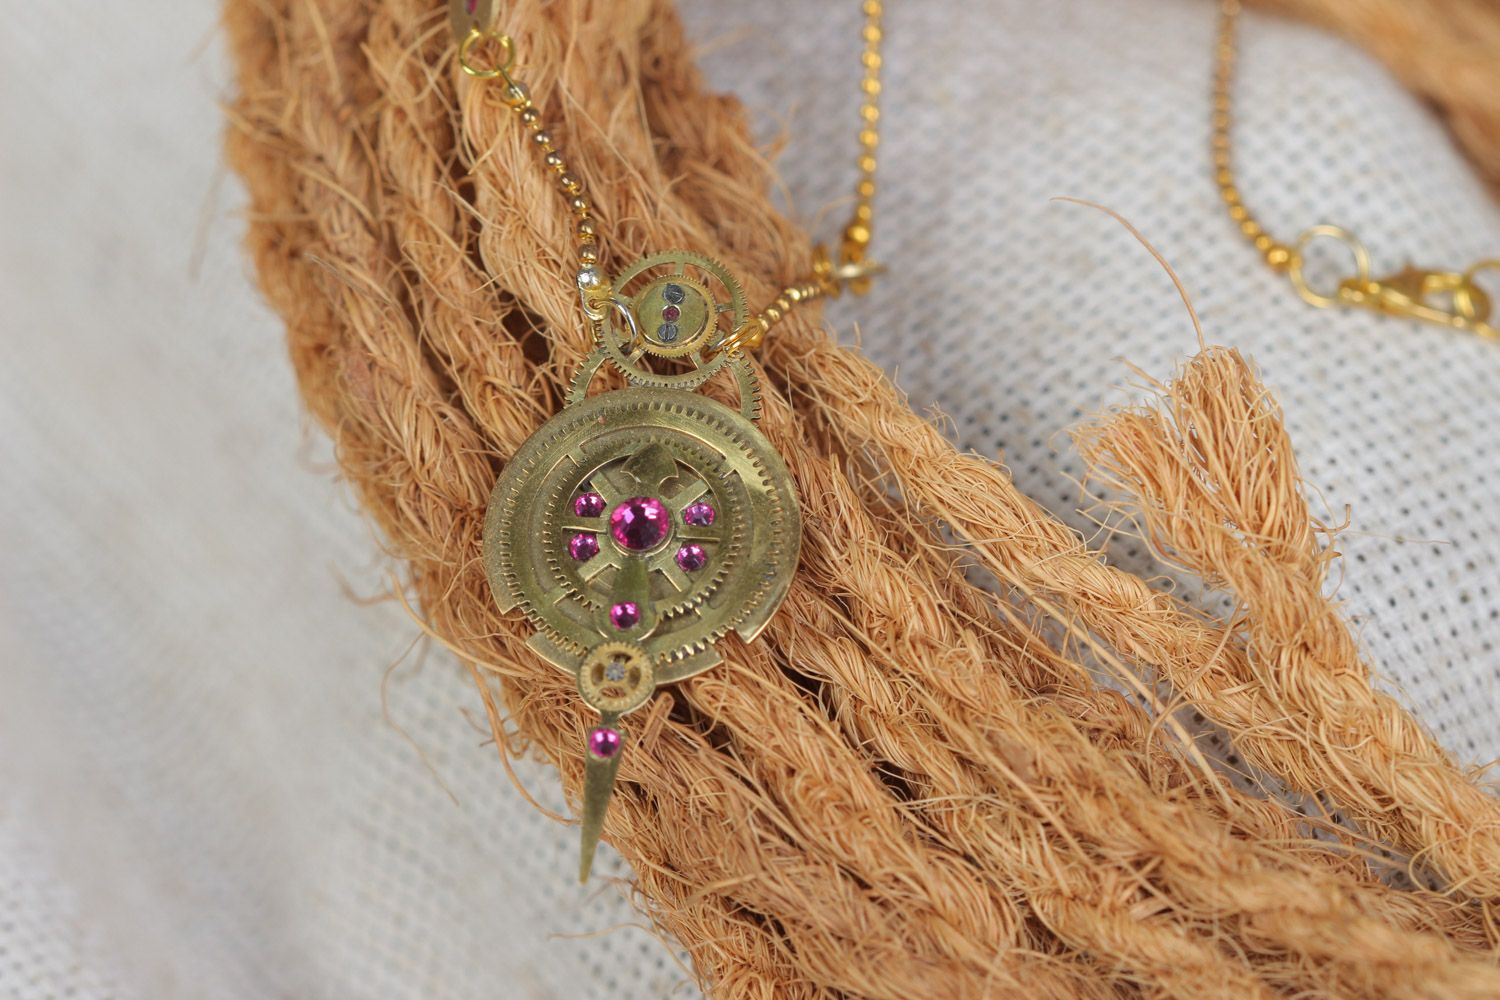 Handmade steampunk pendant with clockwork details and crystals on chain photo 1